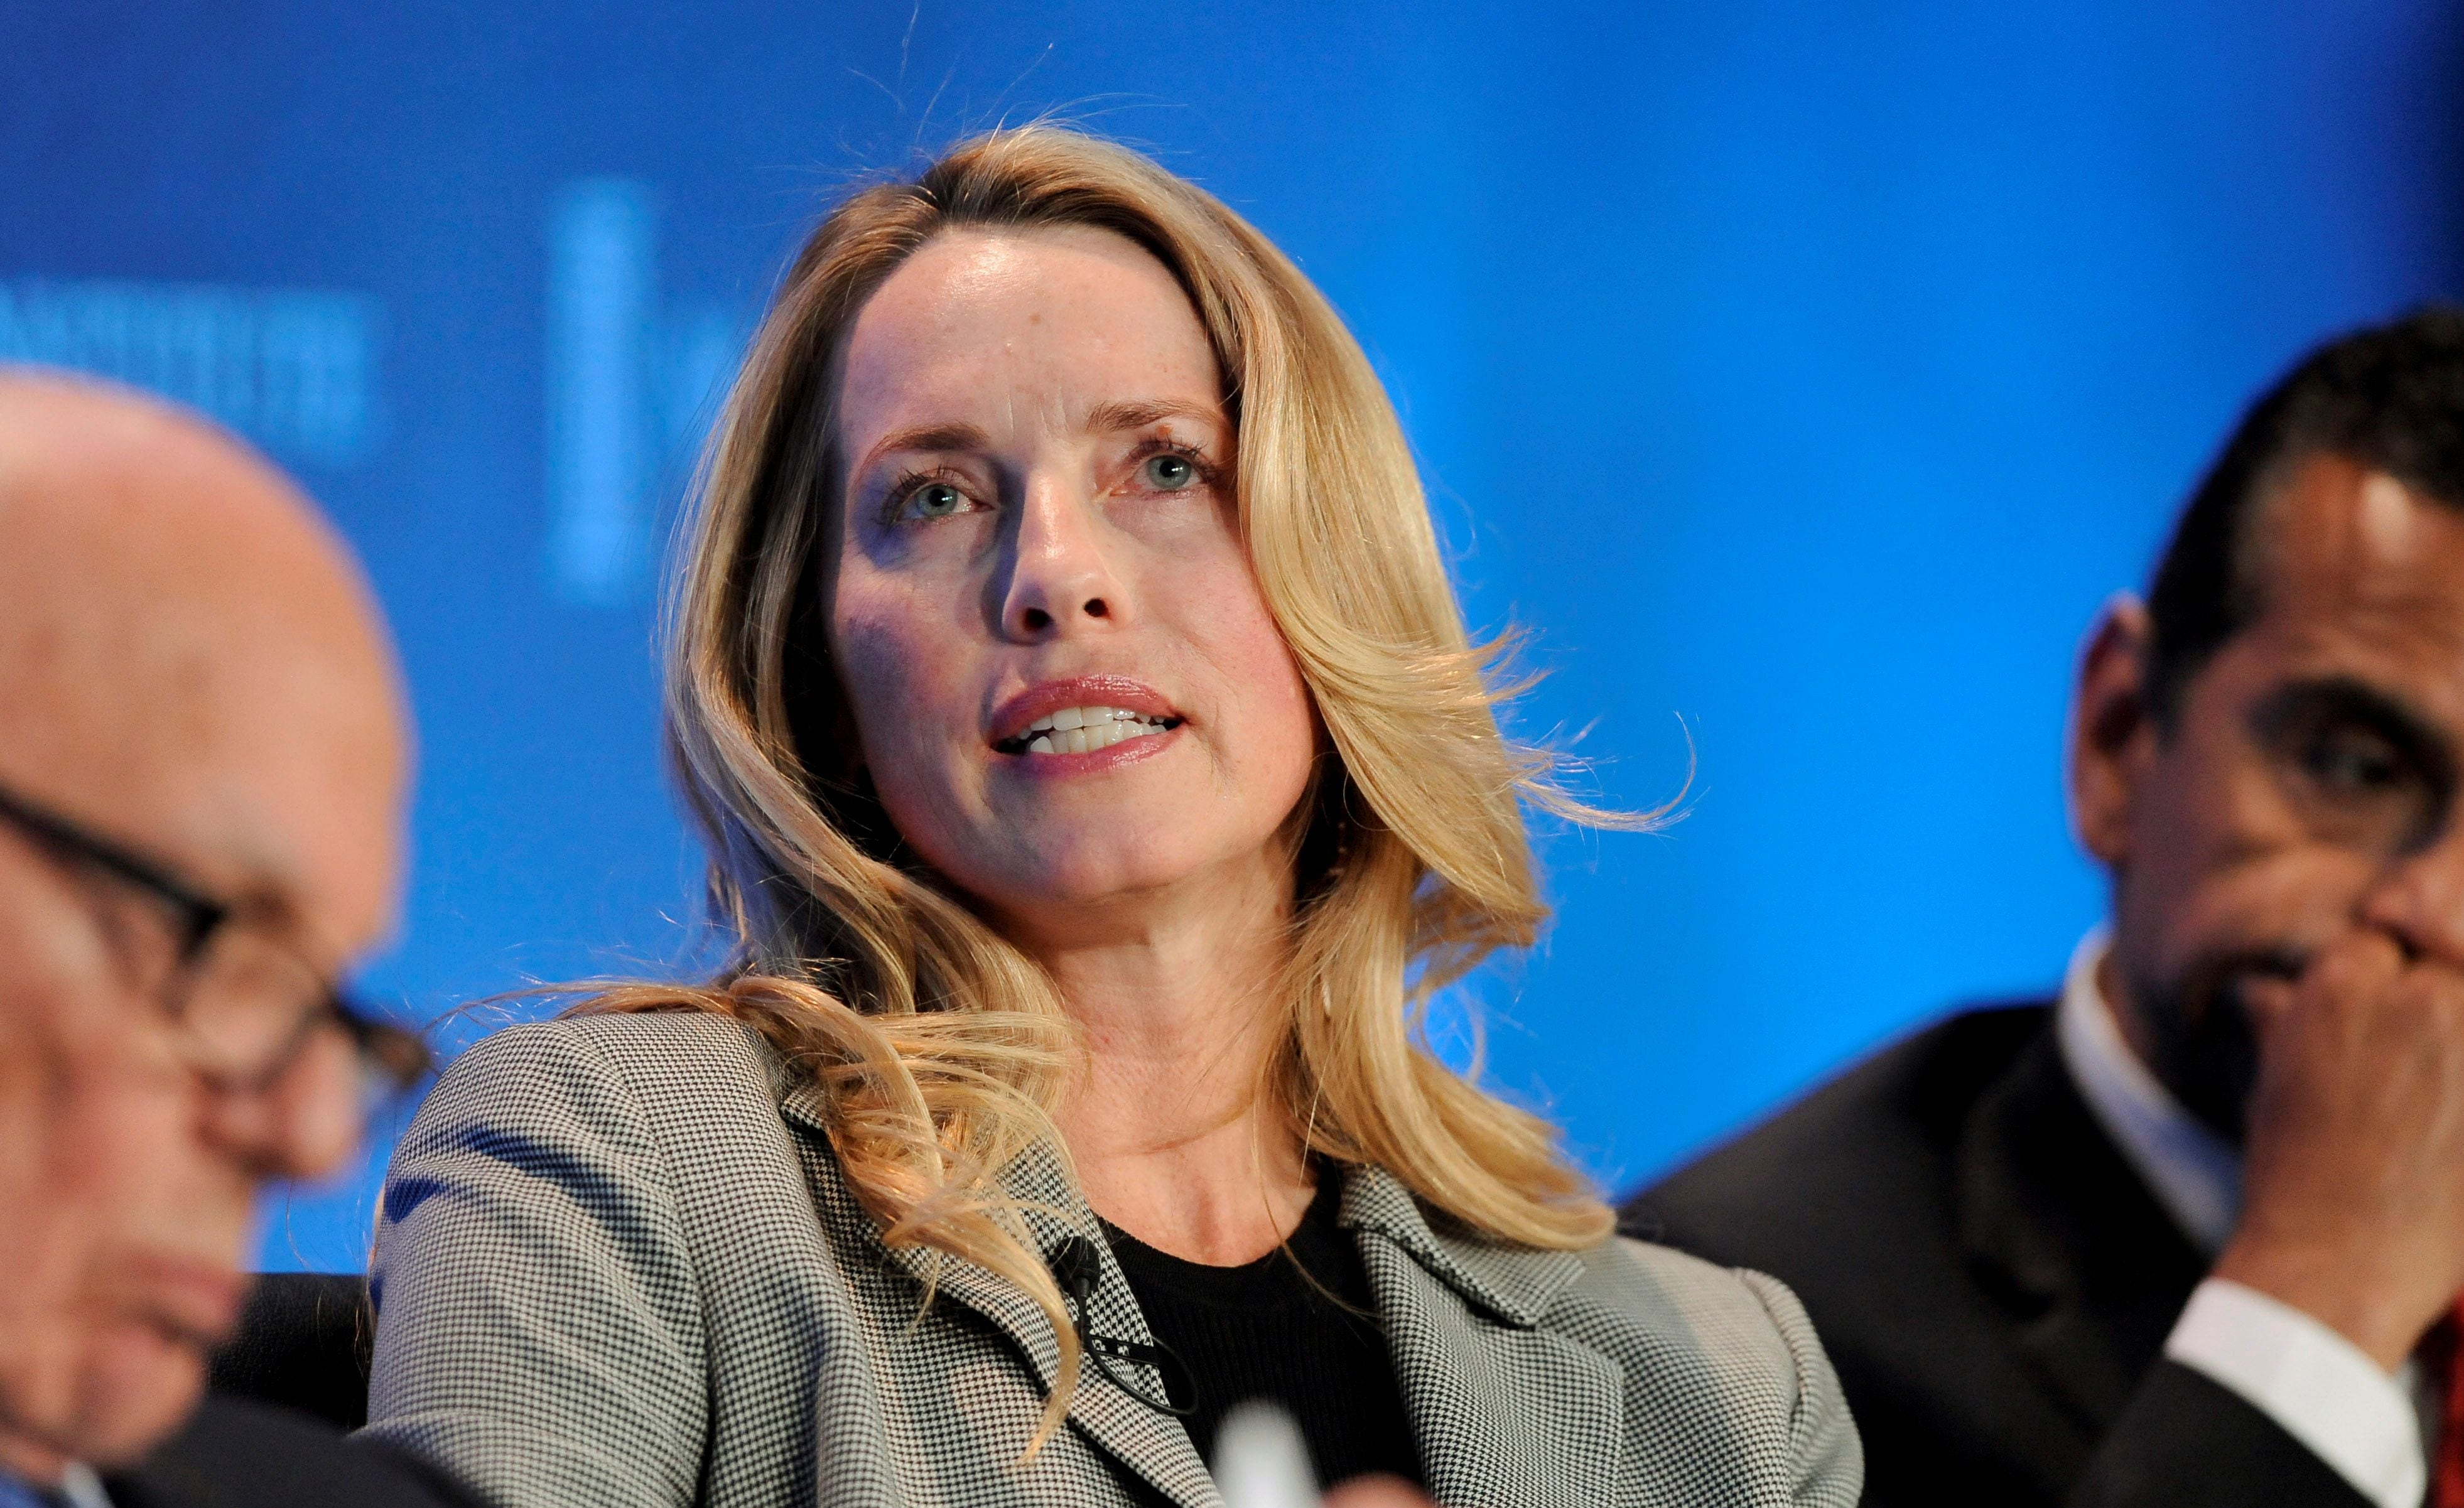 FILE PHOTO: Laurene Powell Jobs, founder and chair of Emerson Collective and widow of the late Apple founder Steve Jobs, takes part in a panel discussion titled "Immigration Strategy for the Borderless Economy" at the Milken Institute Global Conference in Beverly Hills, California April 29, 2013. REUTERS/Gus Ruelas/File Photo